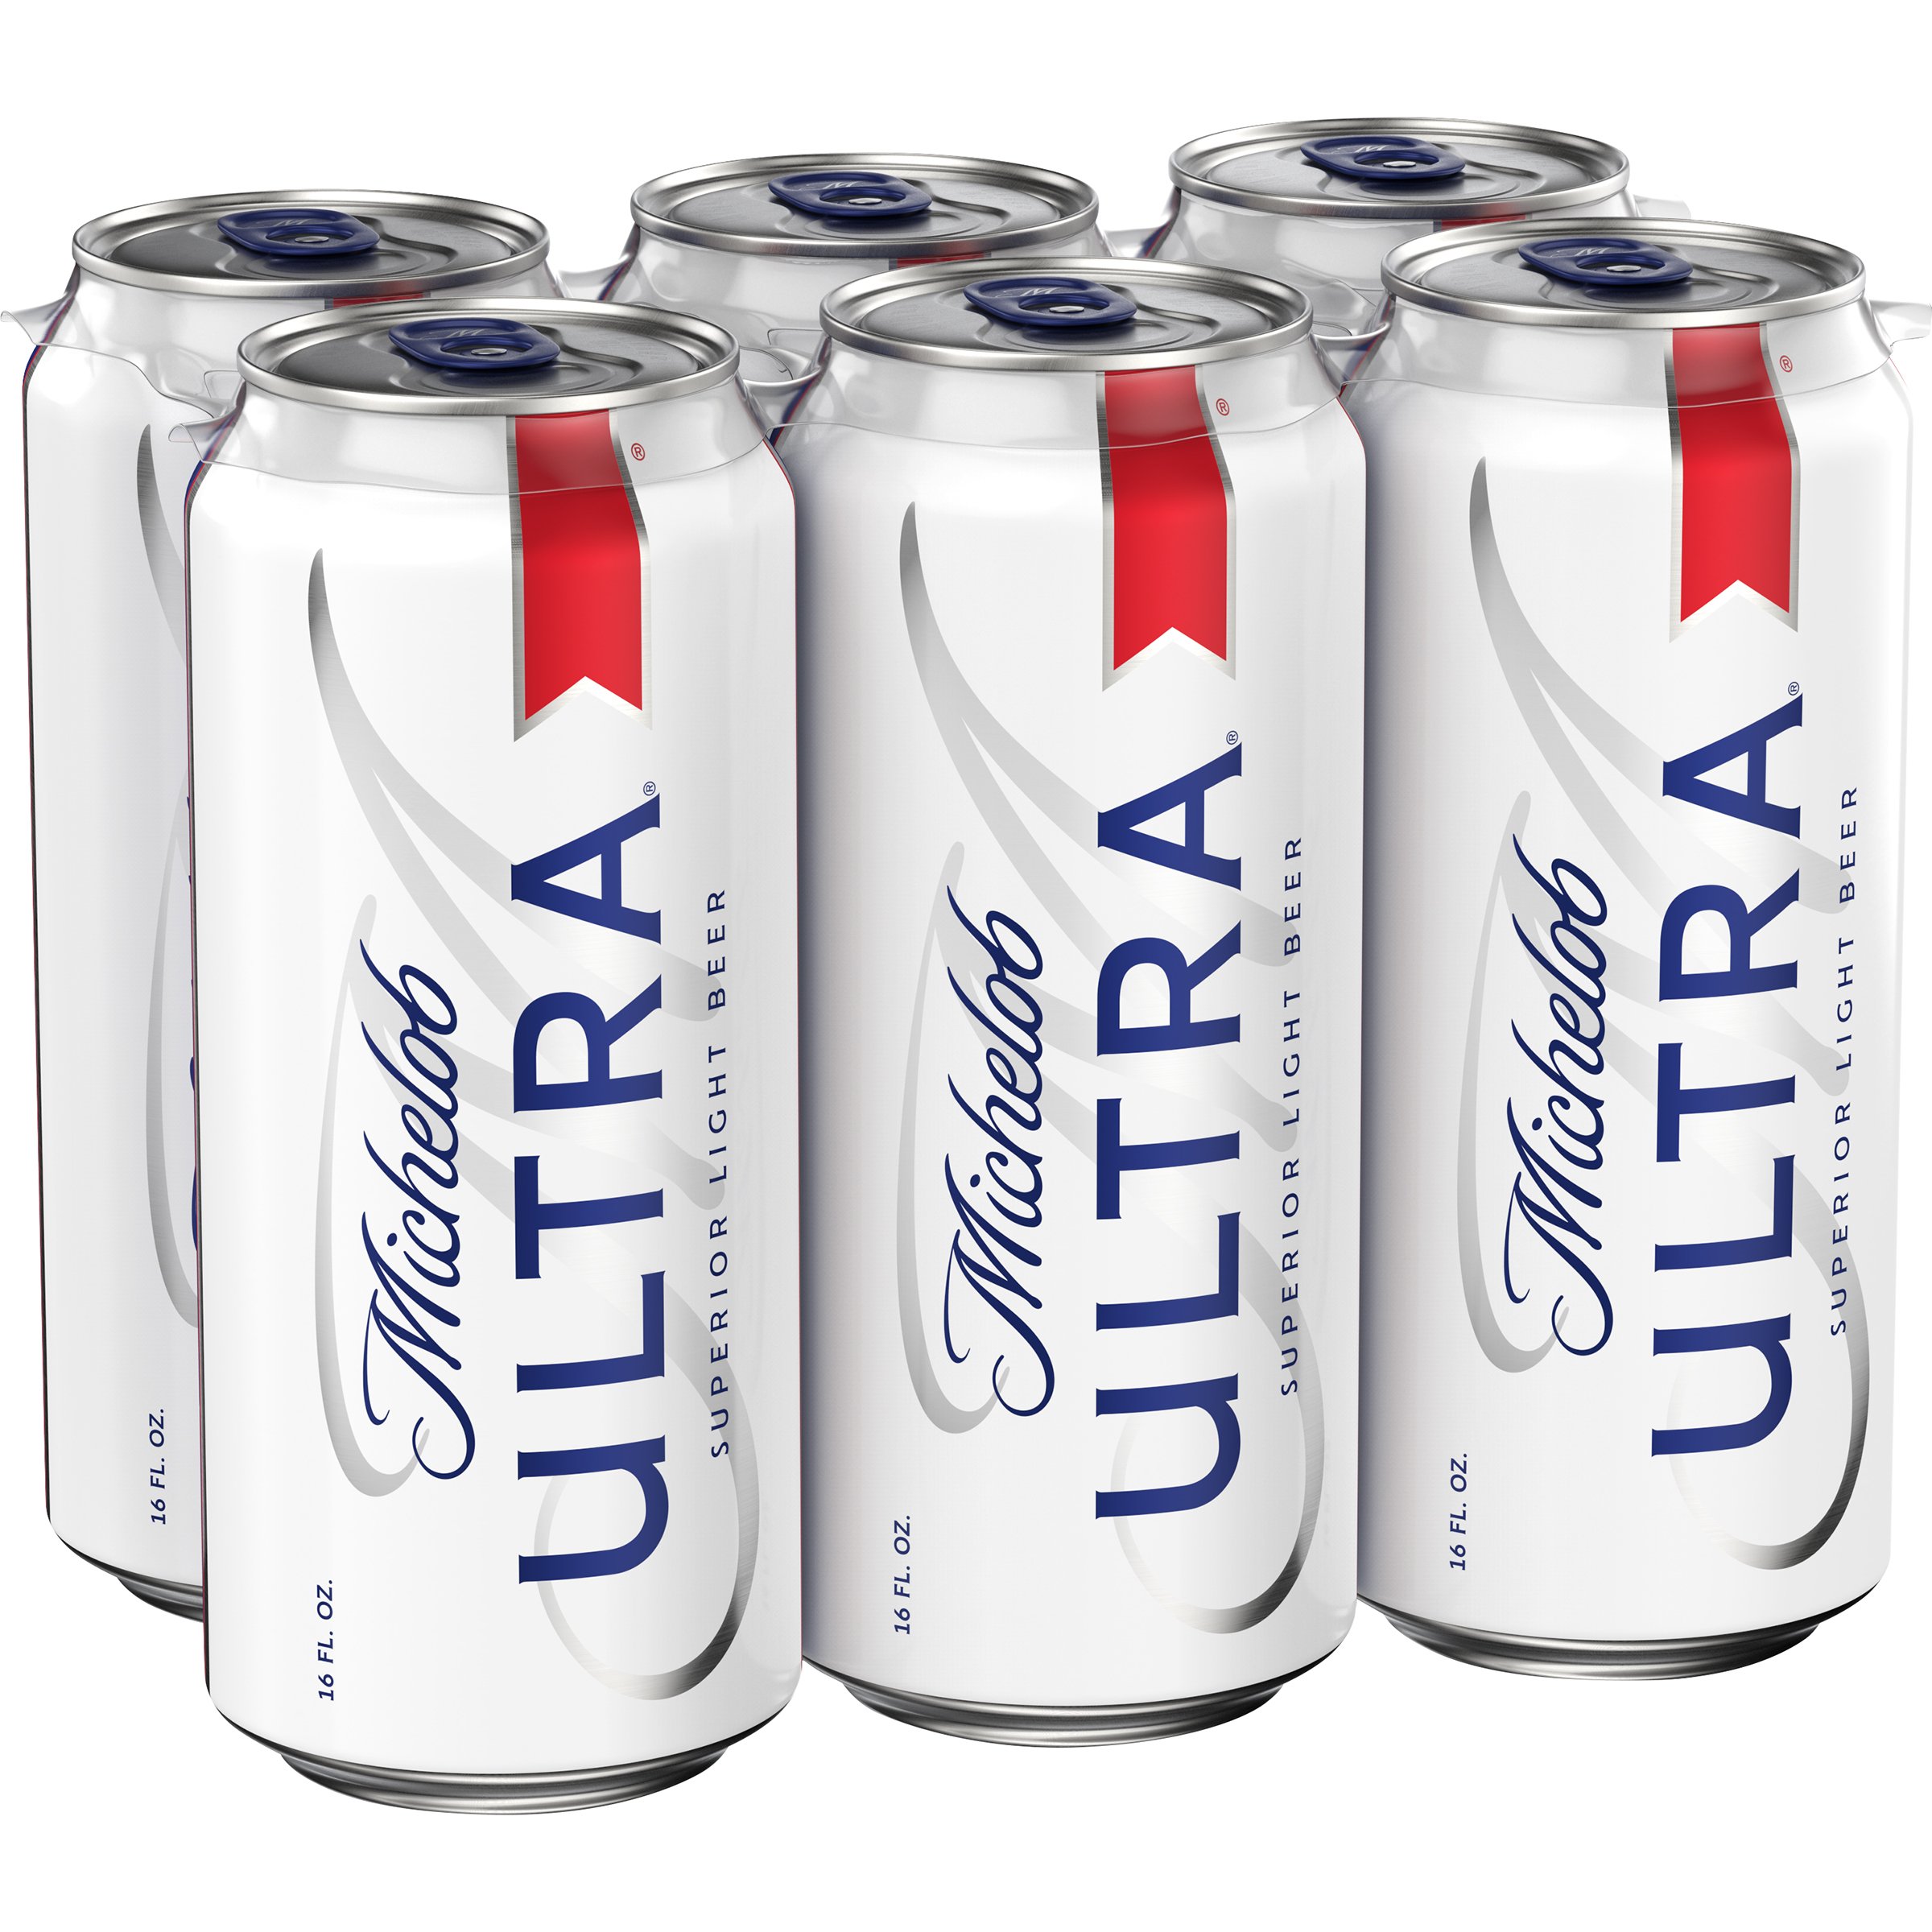 michelob-ultra-light-beer-16-oz-cans-shop-beer-at-h-e-b